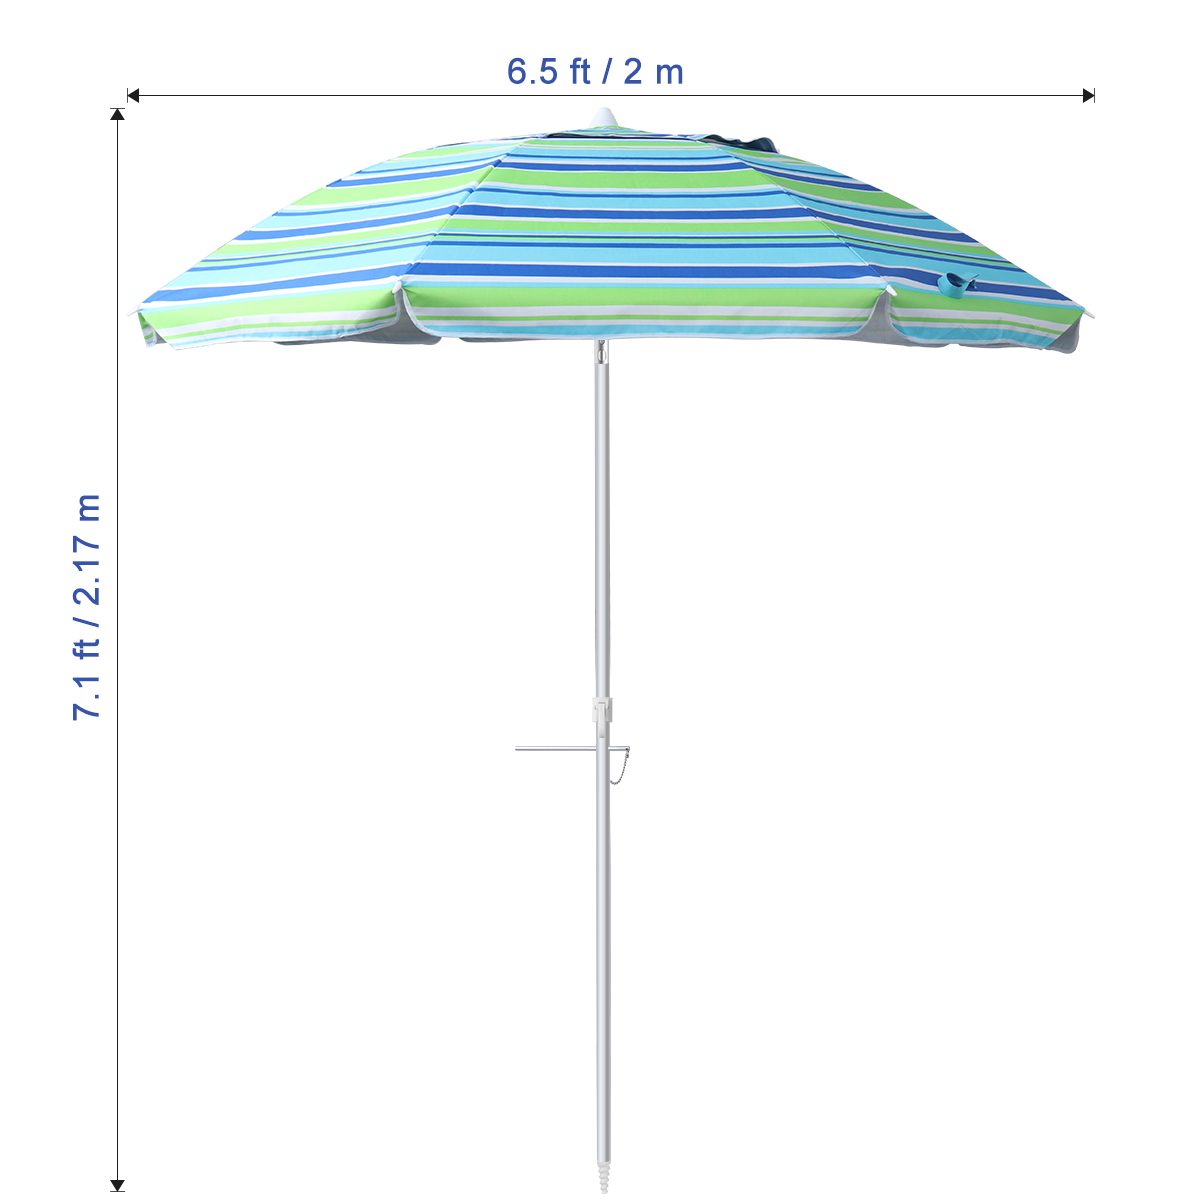 MOVTOTOP 6.5 Feet Striped Beach Umbrella UV Protection with Tilt and Telescoping Pole Adjustable Sand Umbrella with Sand Anchor and Carry Bag (Blue and Green) - image 4 of 8